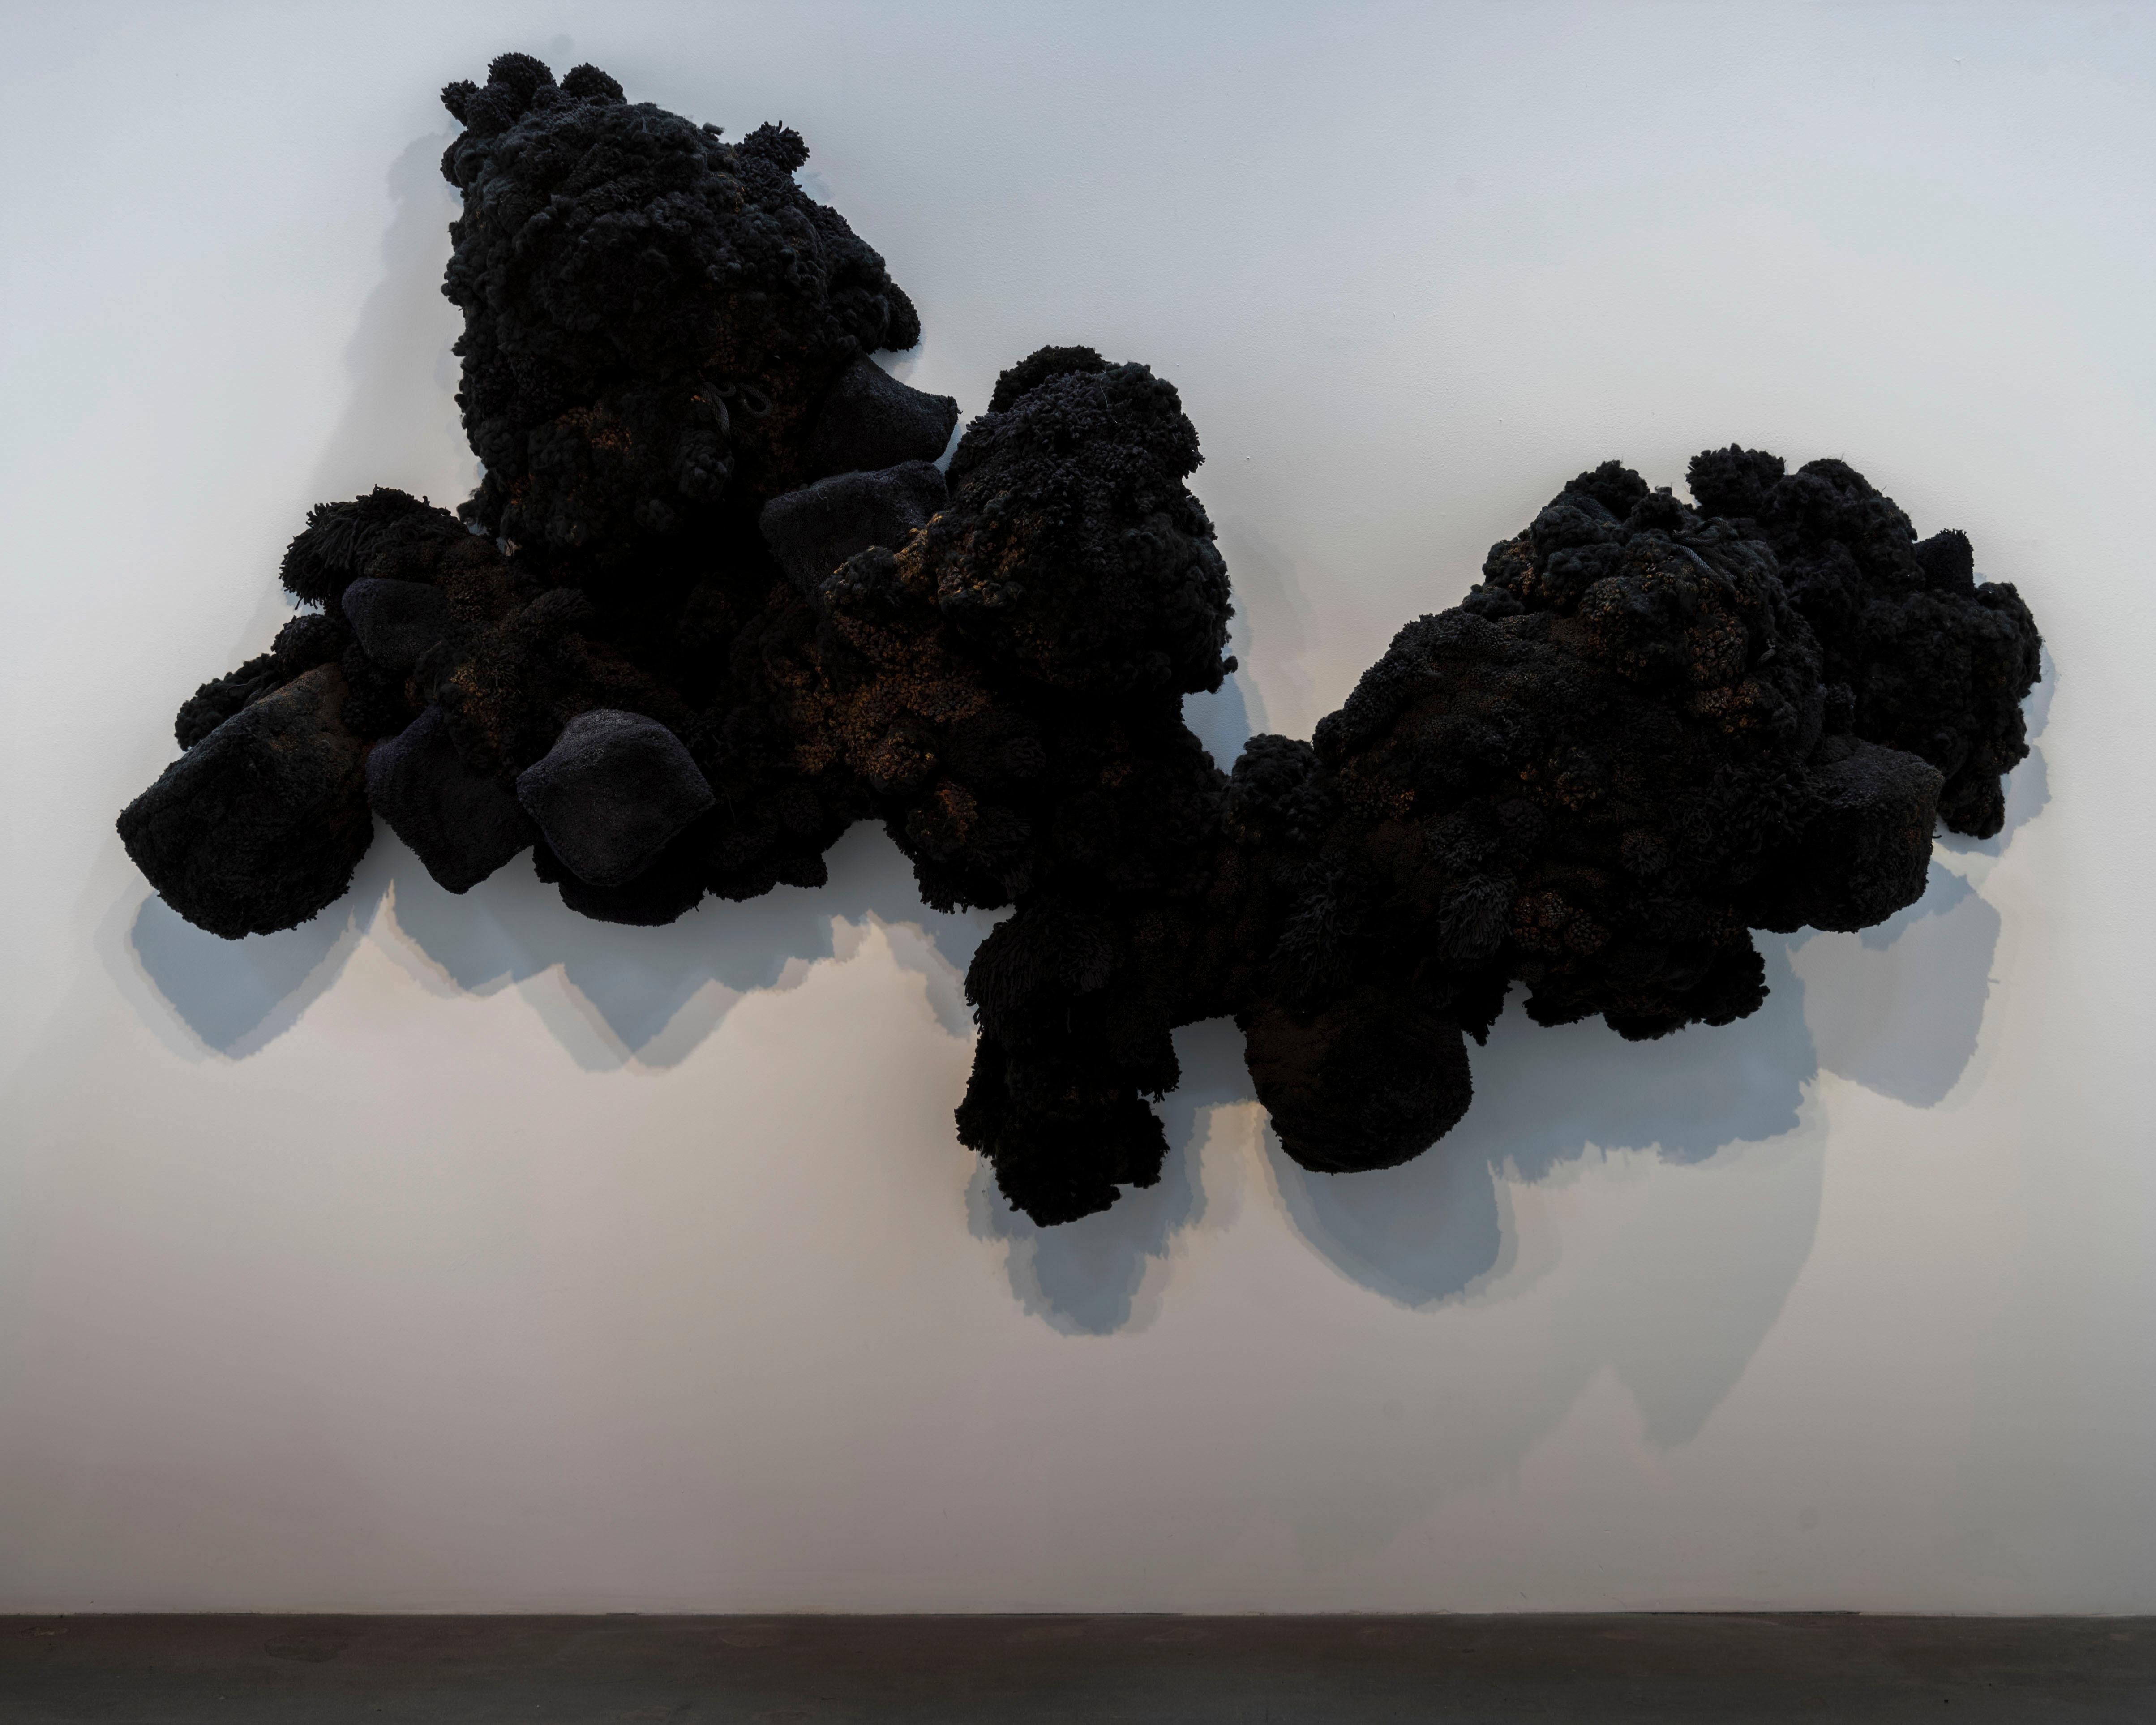 There and Black Sculpture by Mary Brōgger
Unique sculpture. 2019
Dimensions: D 38 x W 317.5 x H 183 cm.
Materials: Hand tied singed acrylic yarn, mixed media.

Work is modular and can be recomposed to a degree by the artist.

Mary Brōgger is an